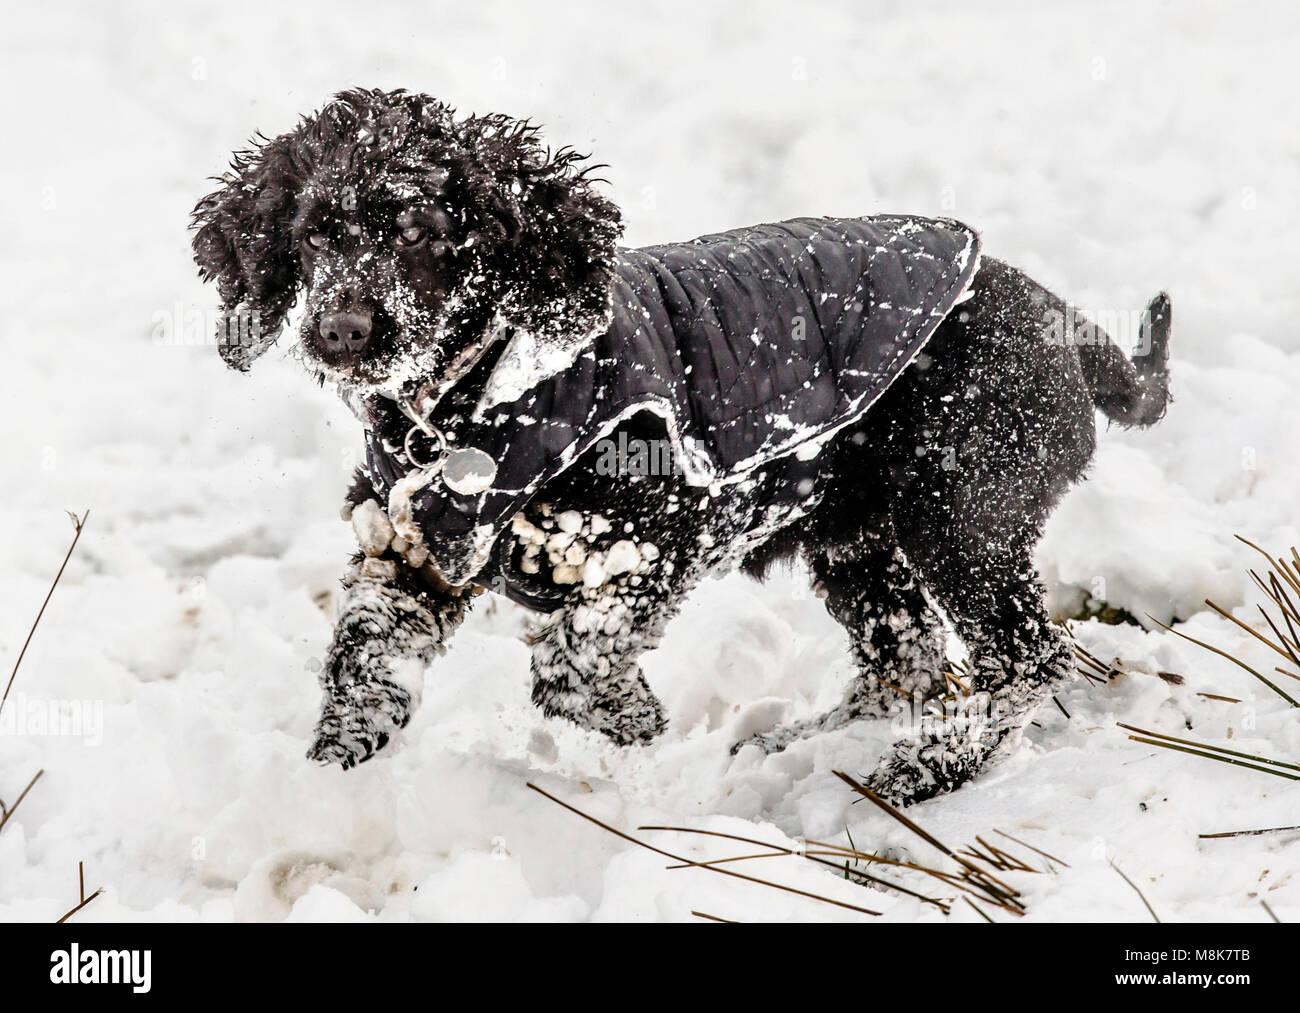 Zara the dog plays in the snow in Chapel-en-le-Frith, Derbyshire, as the wintry snap dubbed the 'mini beast from the east' keeps its grip on the UK. Stock Photo